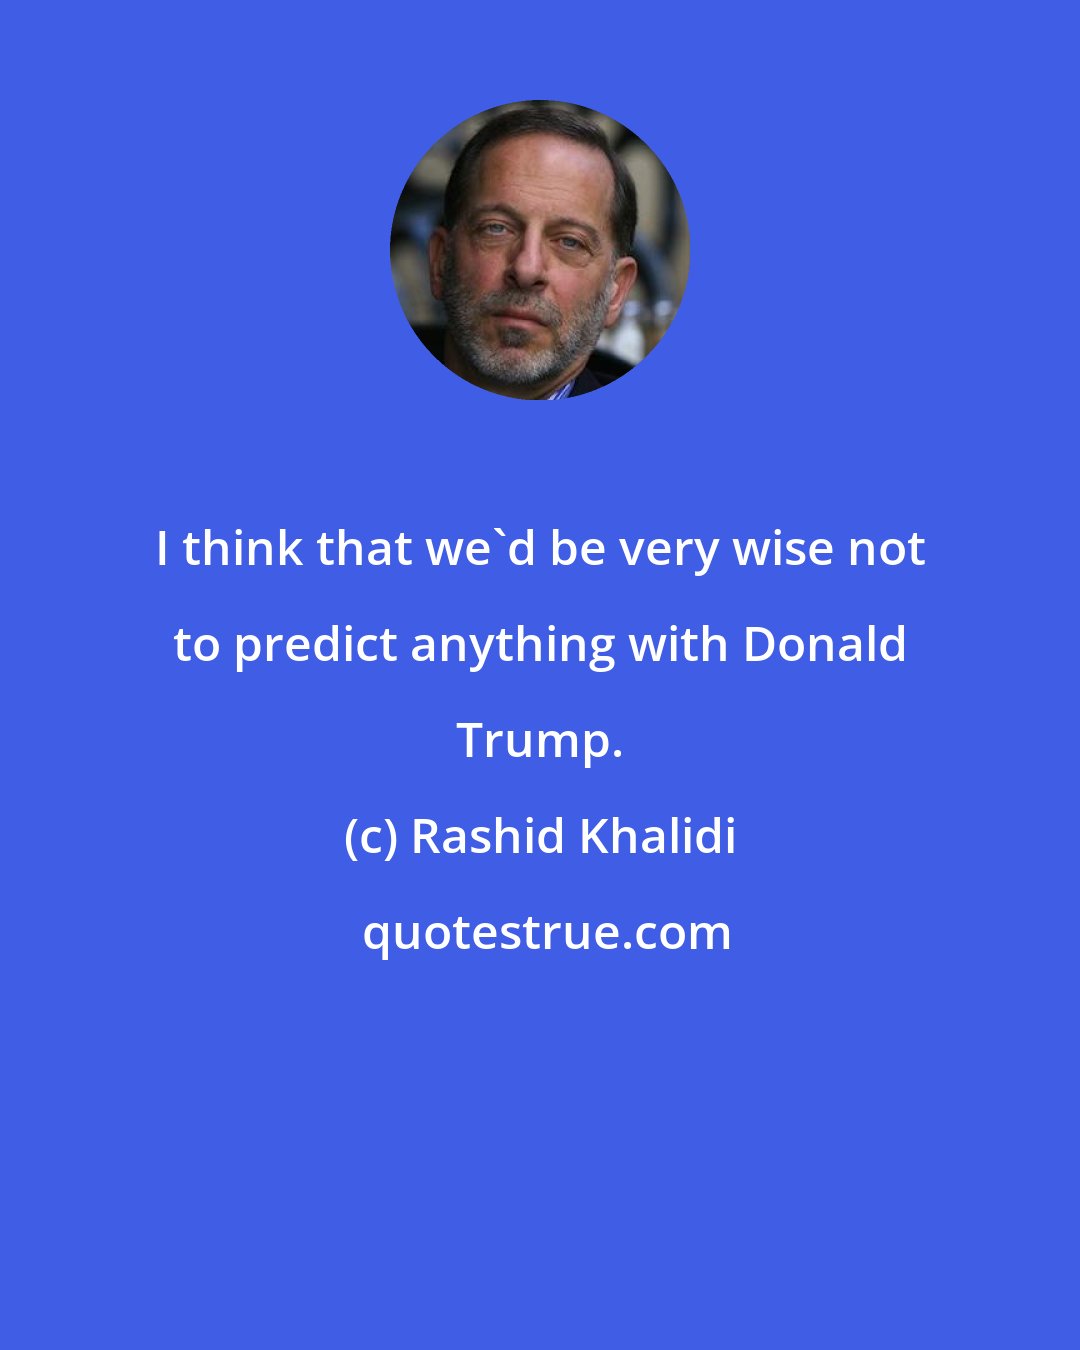 Rashid Khalidi: I think that we'd be very wise not to predict anything with Donald Trump.